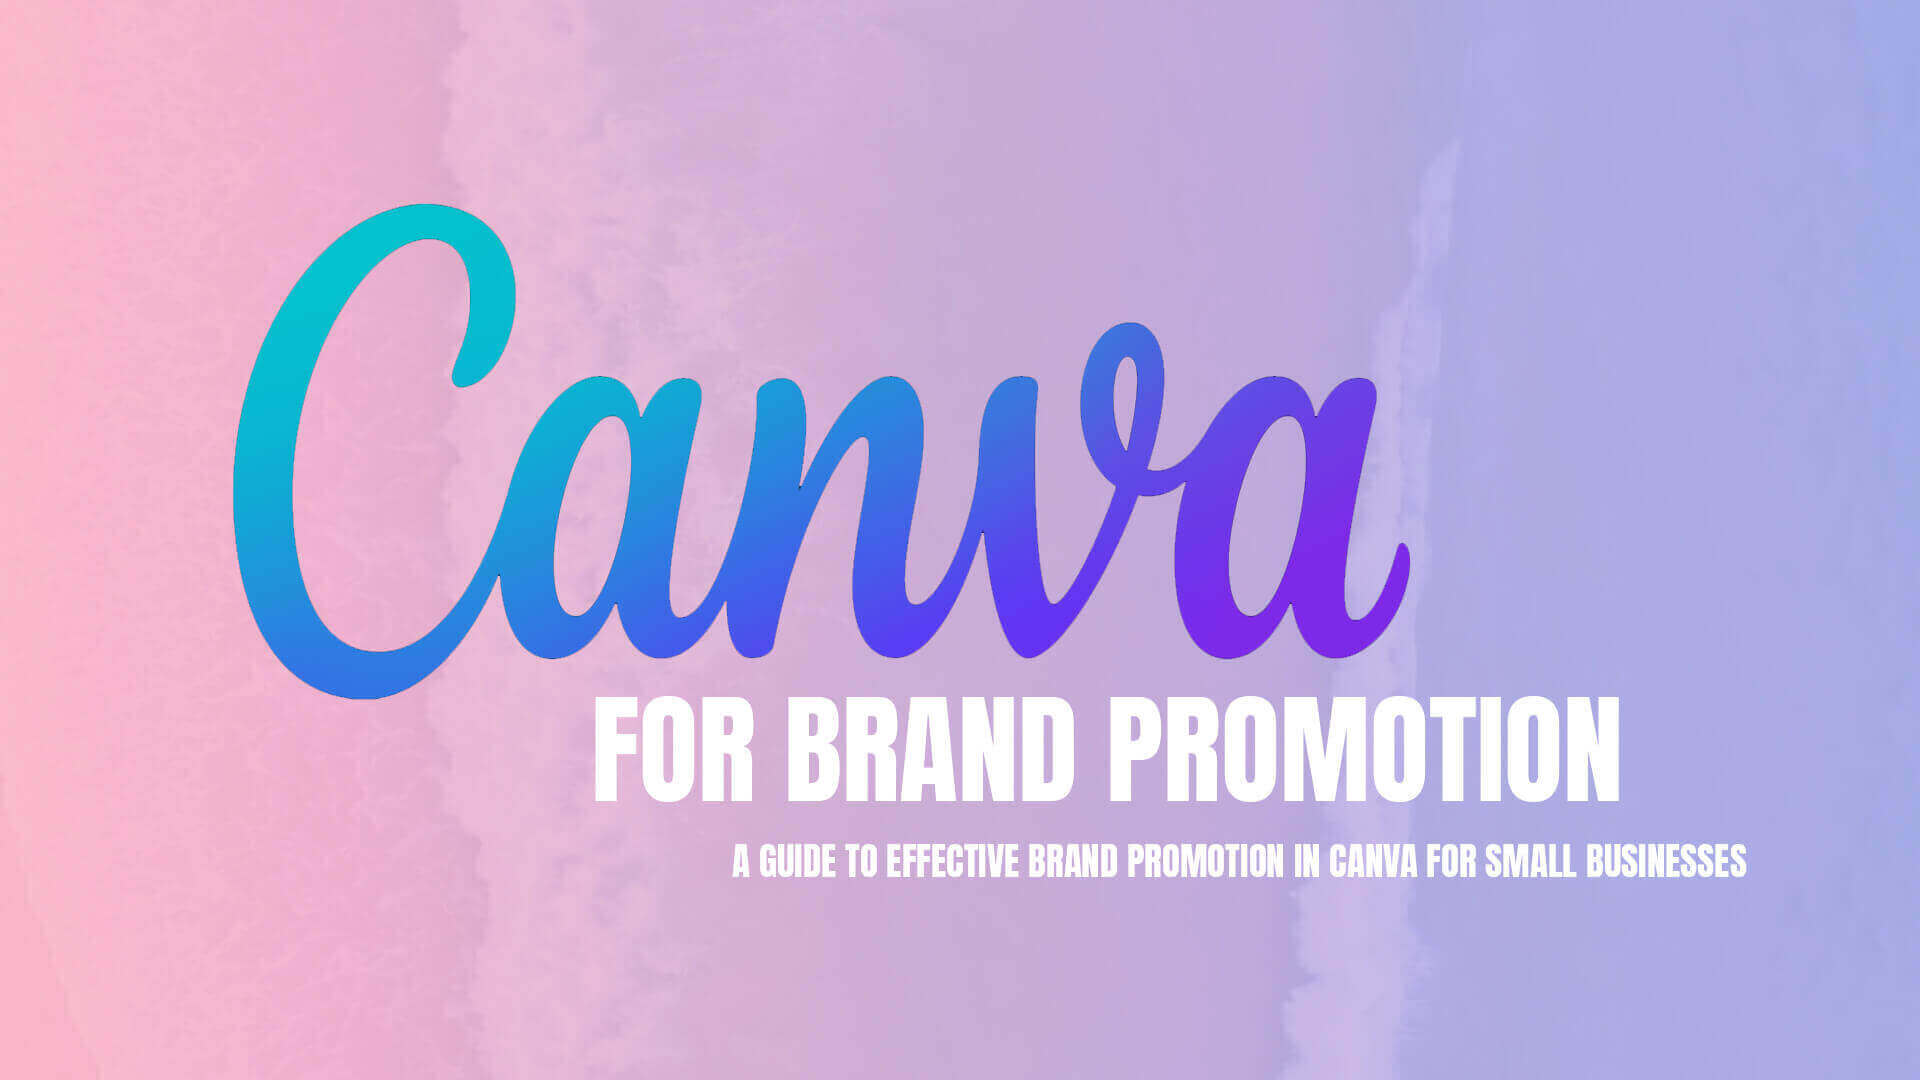 CANVA GUIDE TO BRAND PROMOTION